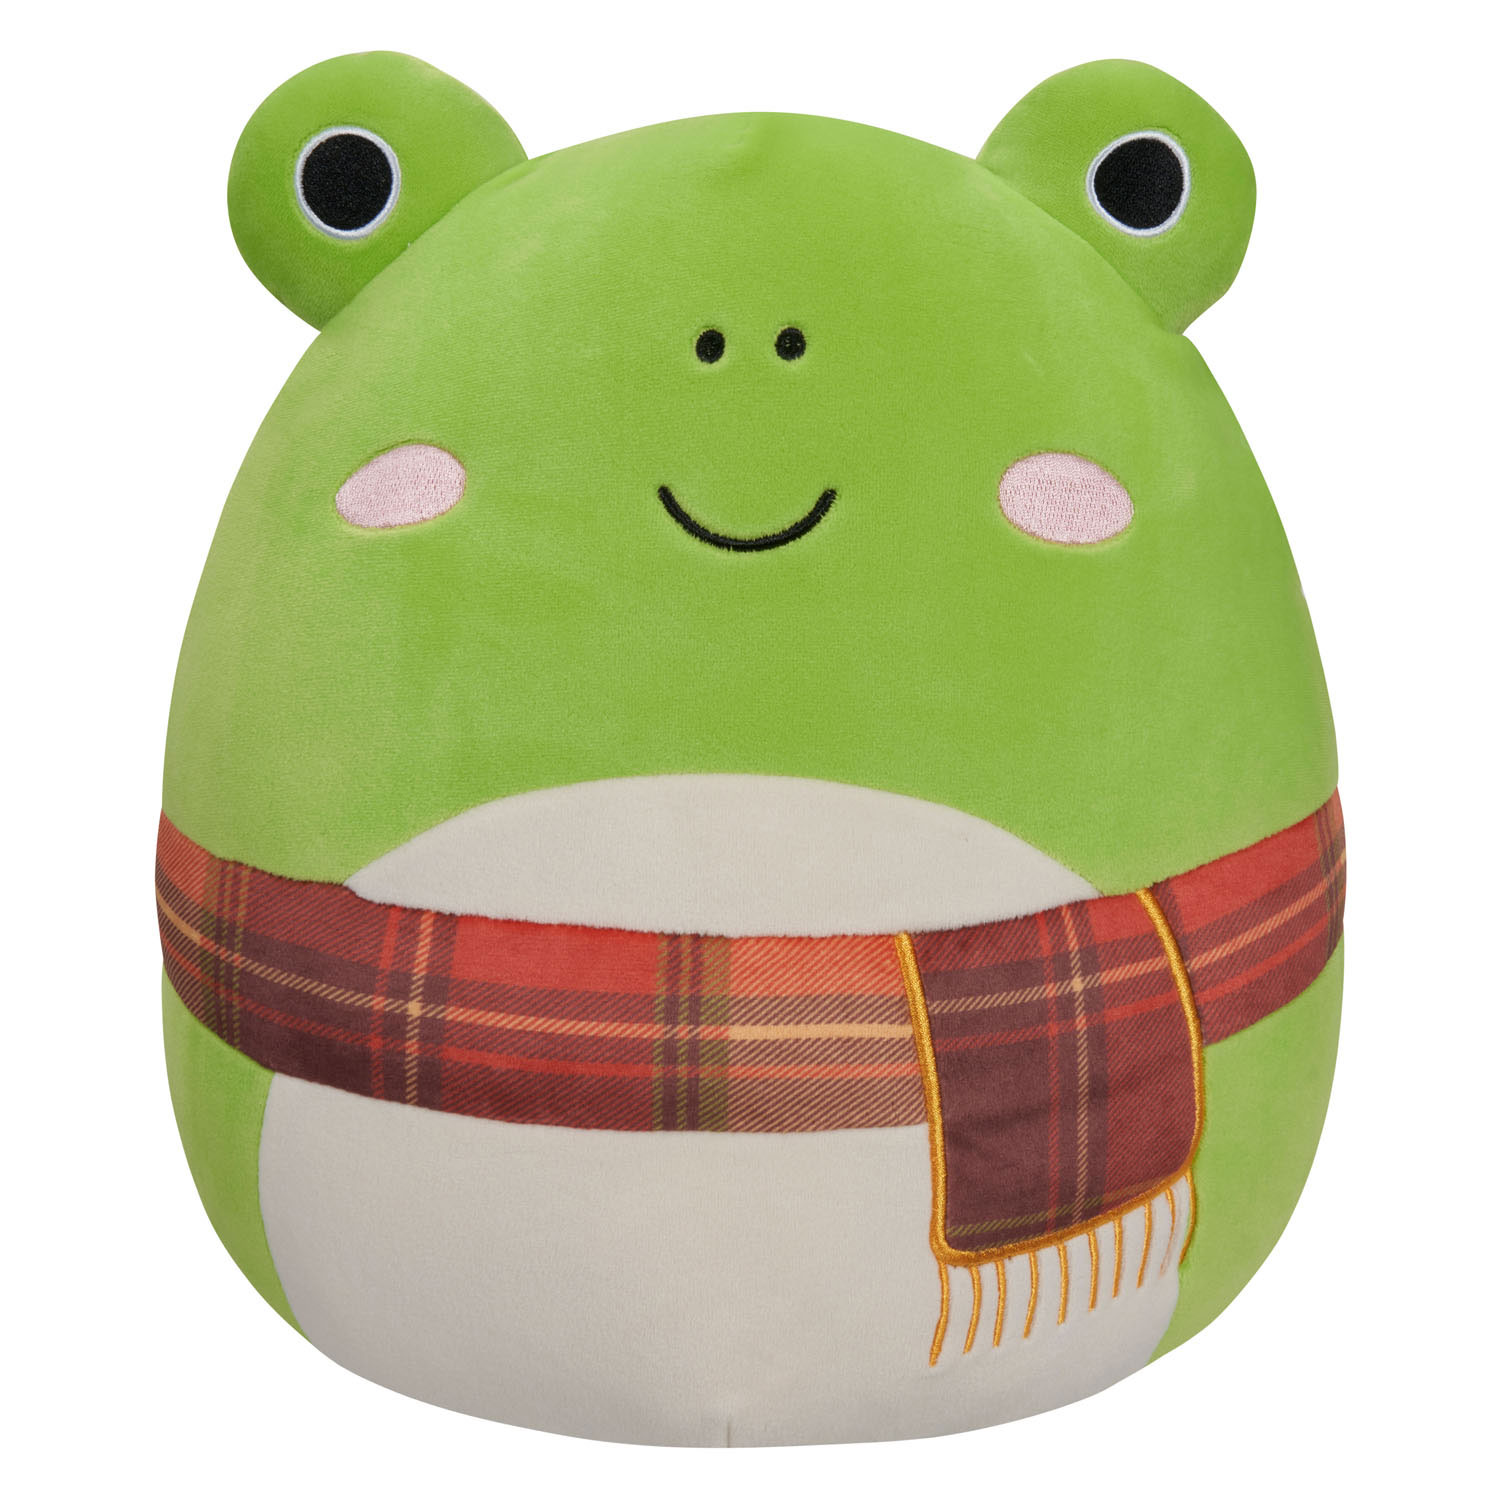 Squishmallows Knuffel Pluche - Wendy the Frog, 30cm